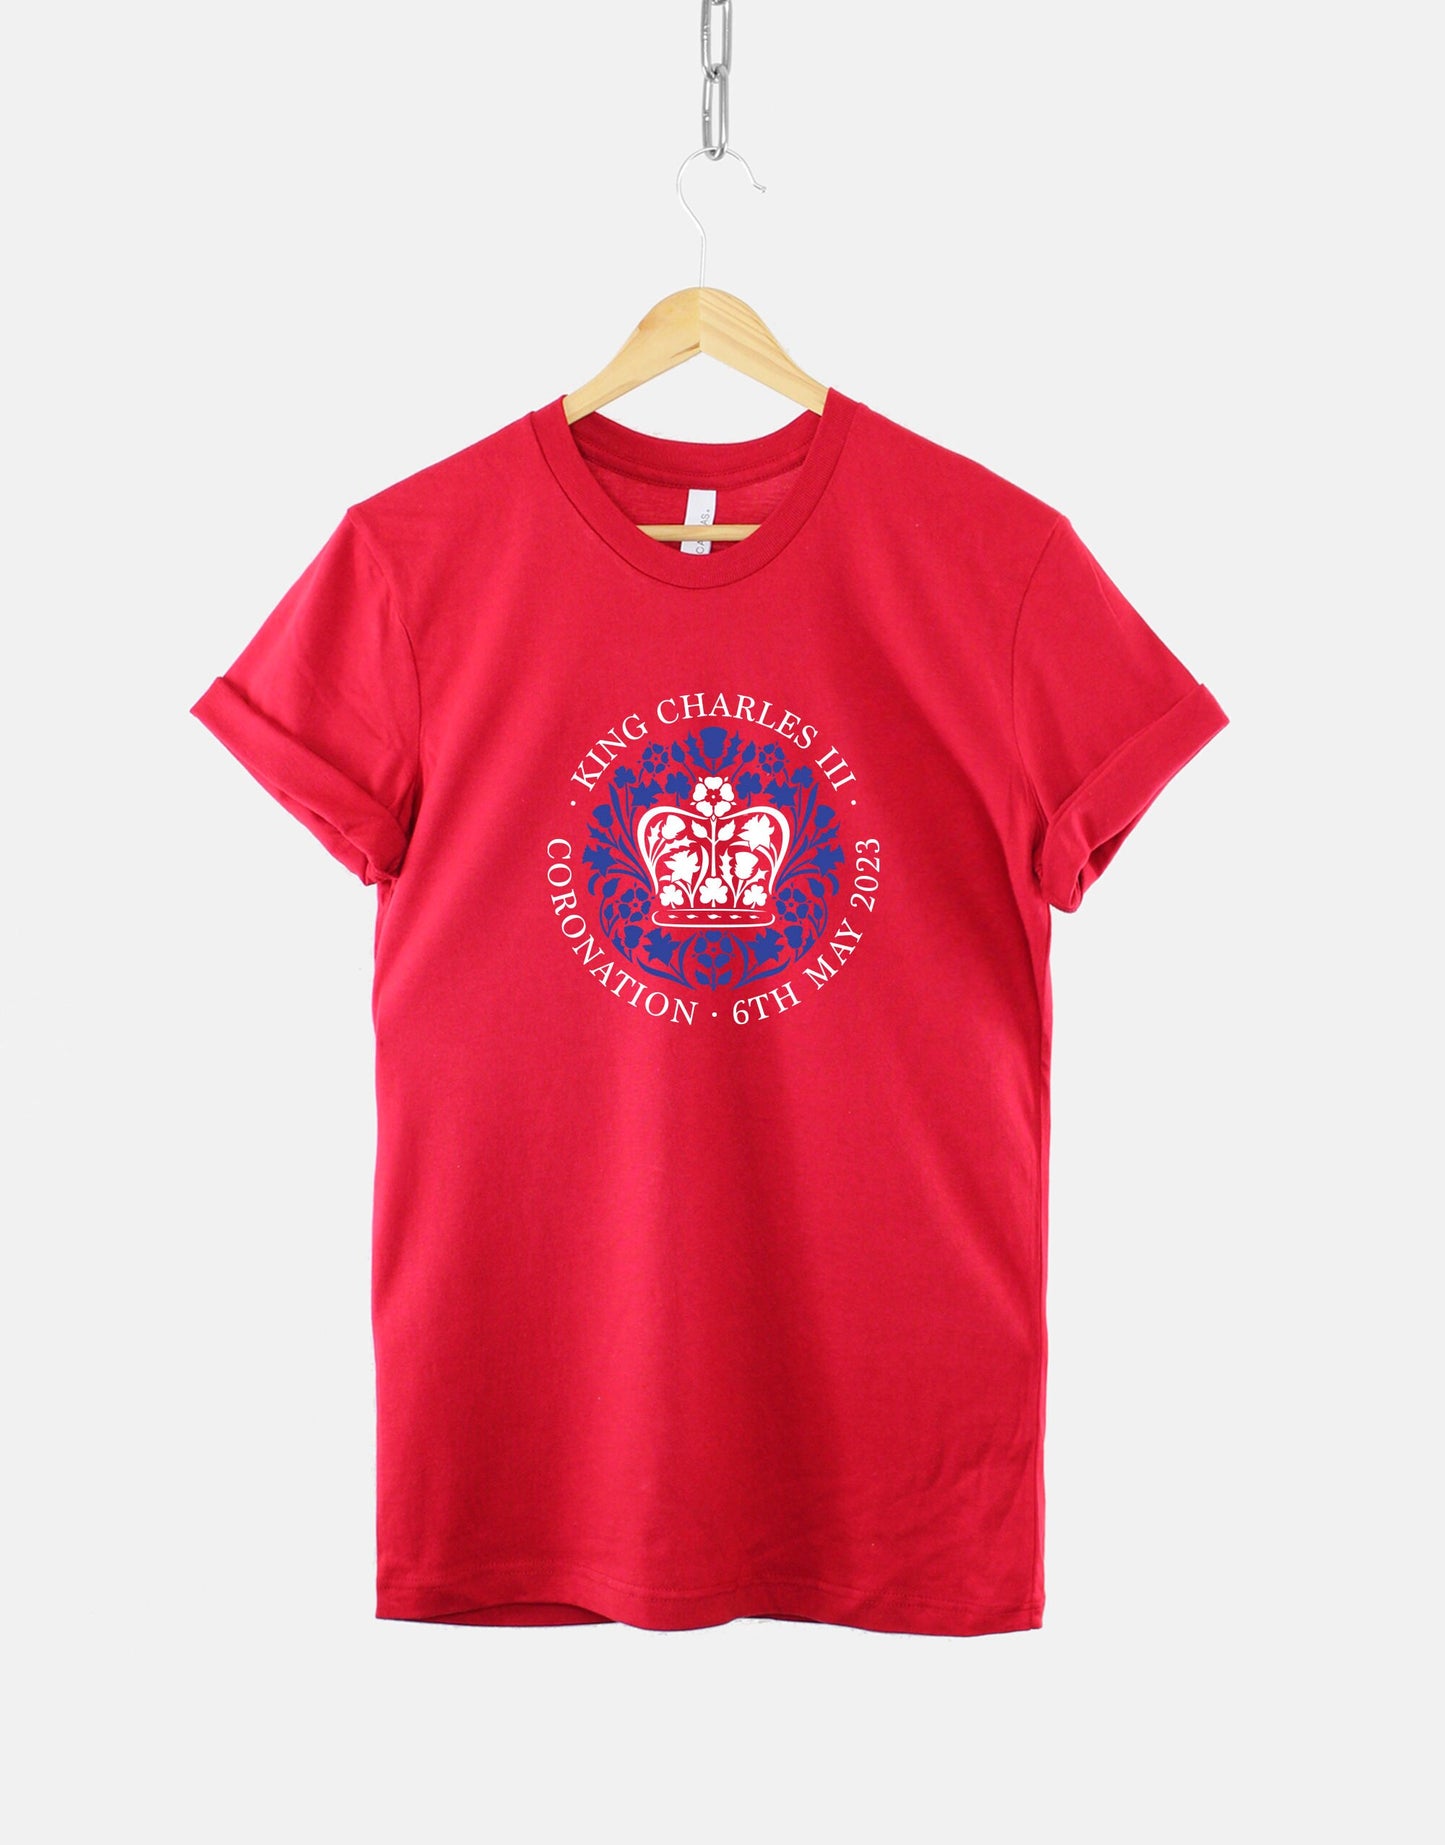 King Charles Coronation T-Shirts - King Charles III Coronation Day Souvenir T-Shirt - Coronation Party - Adults And Childrens Sizes